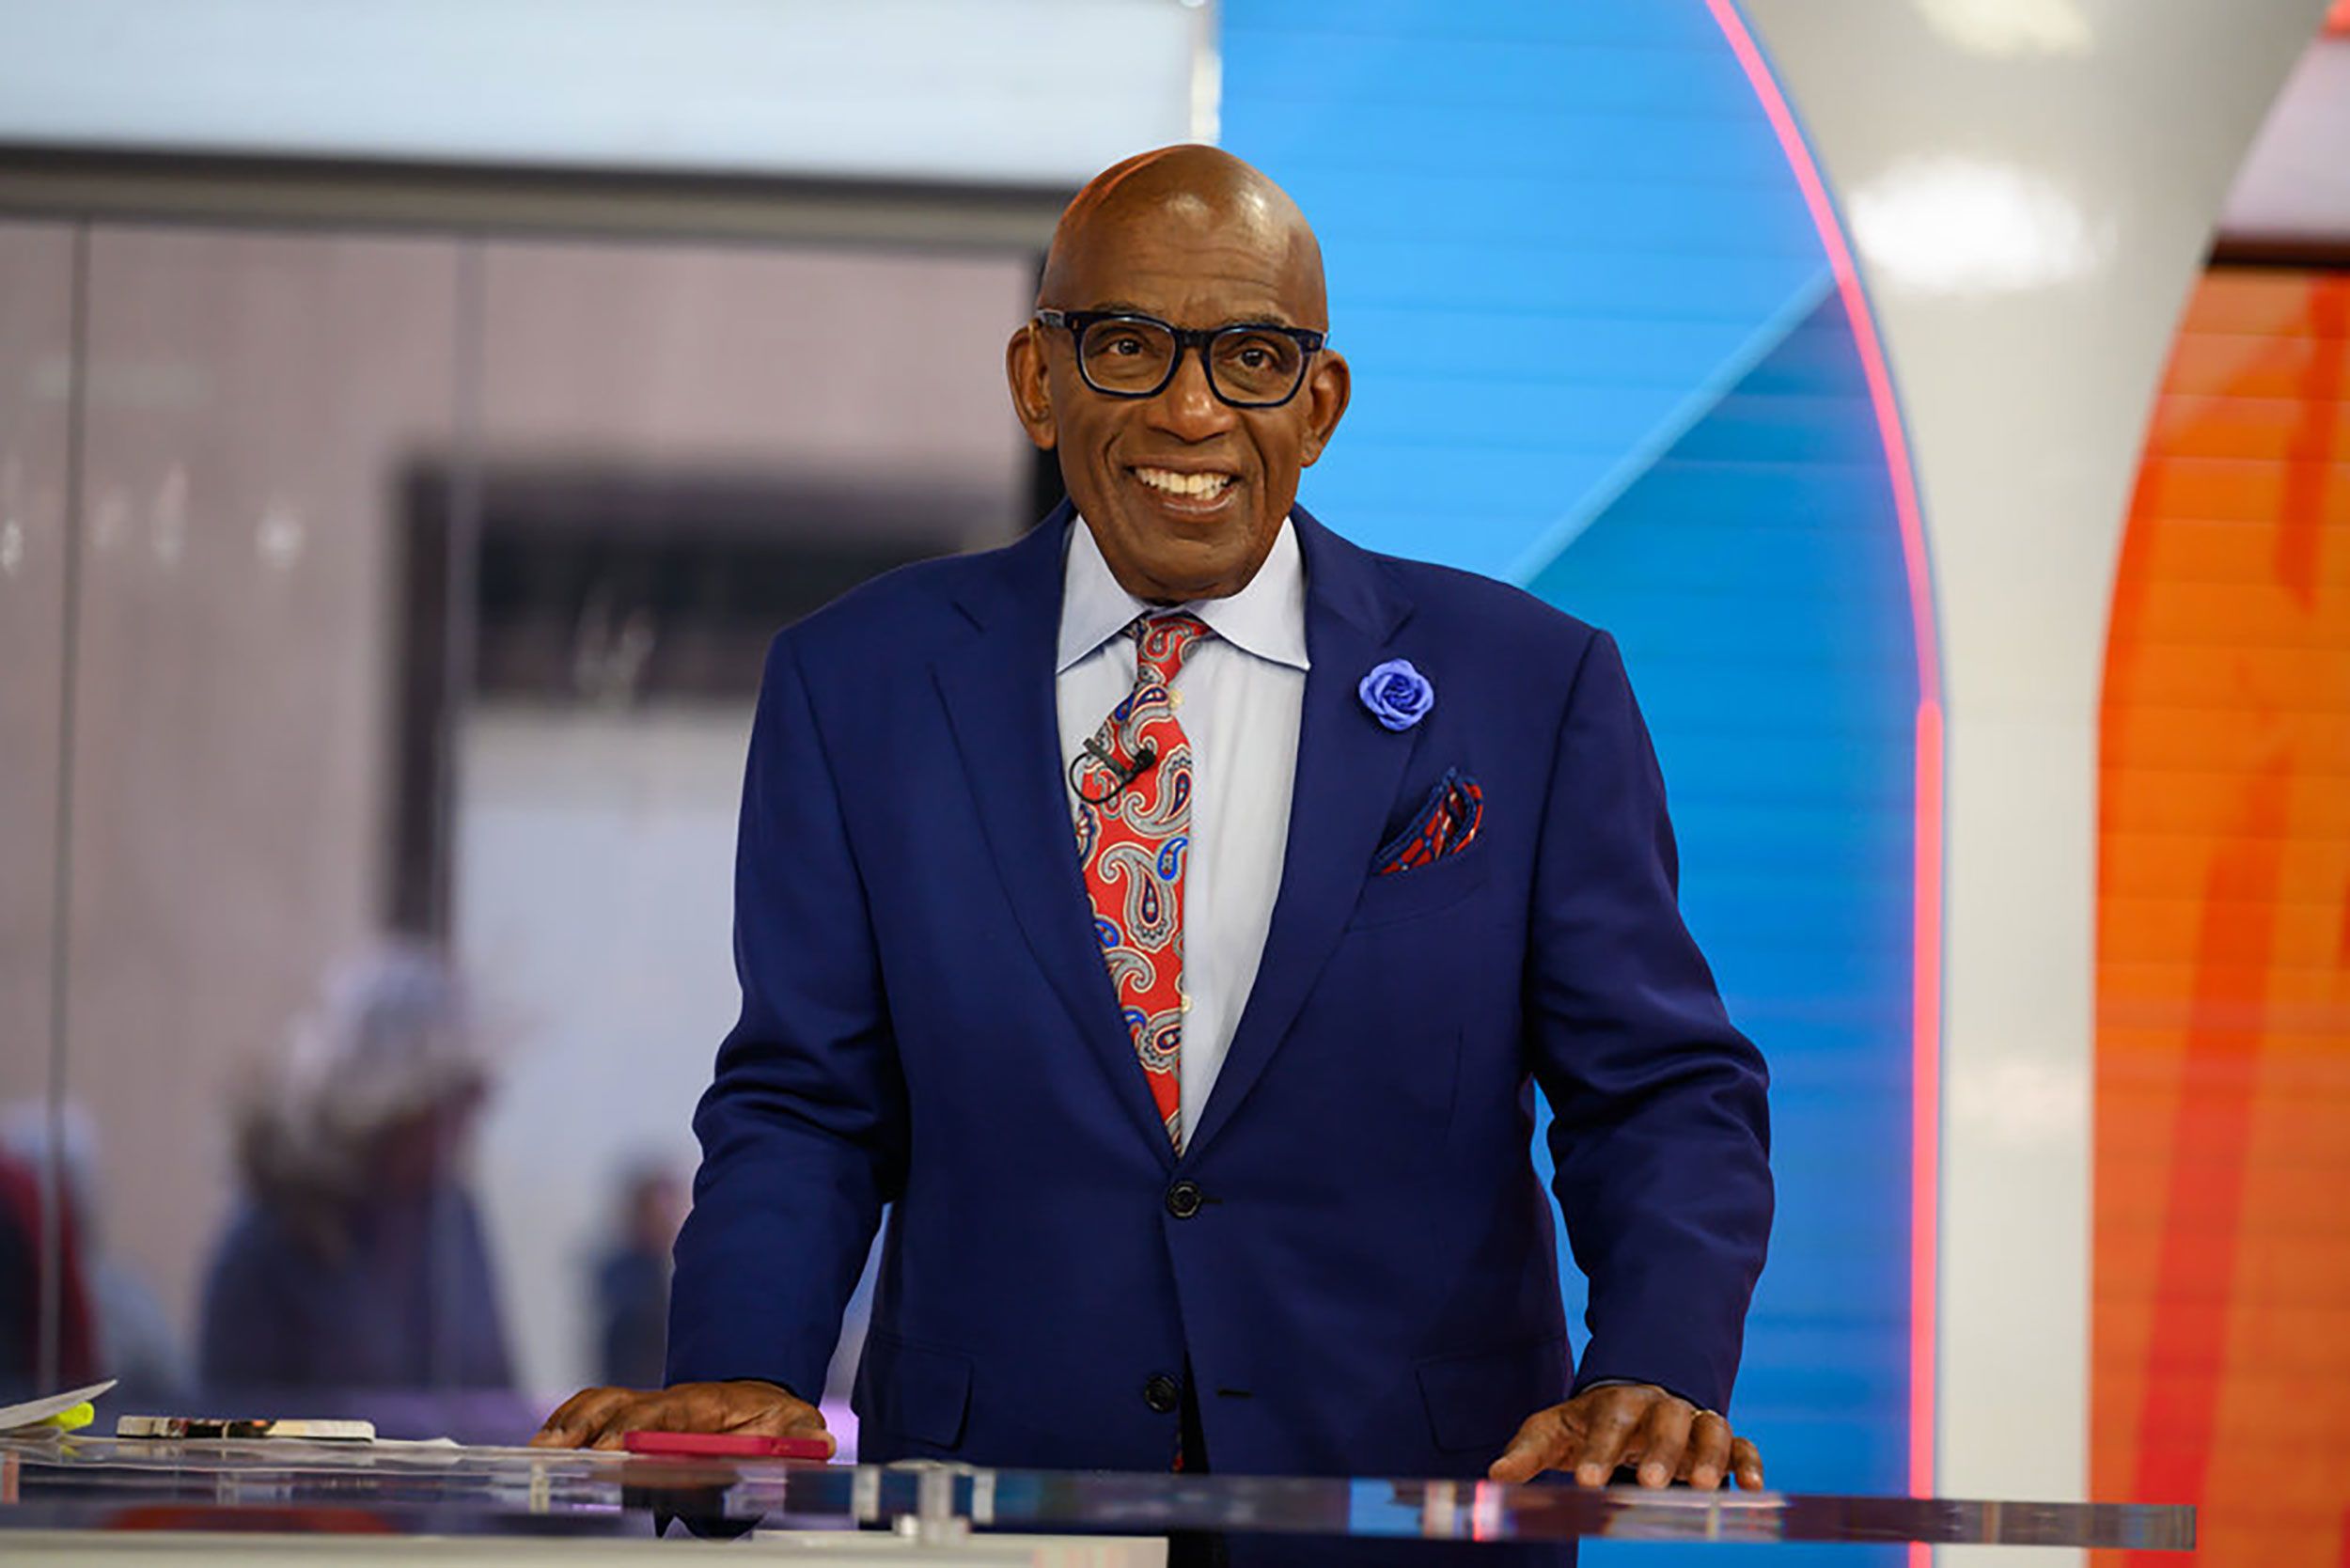 Al Roker is recovering after being hospitalized for blood clots | CNN